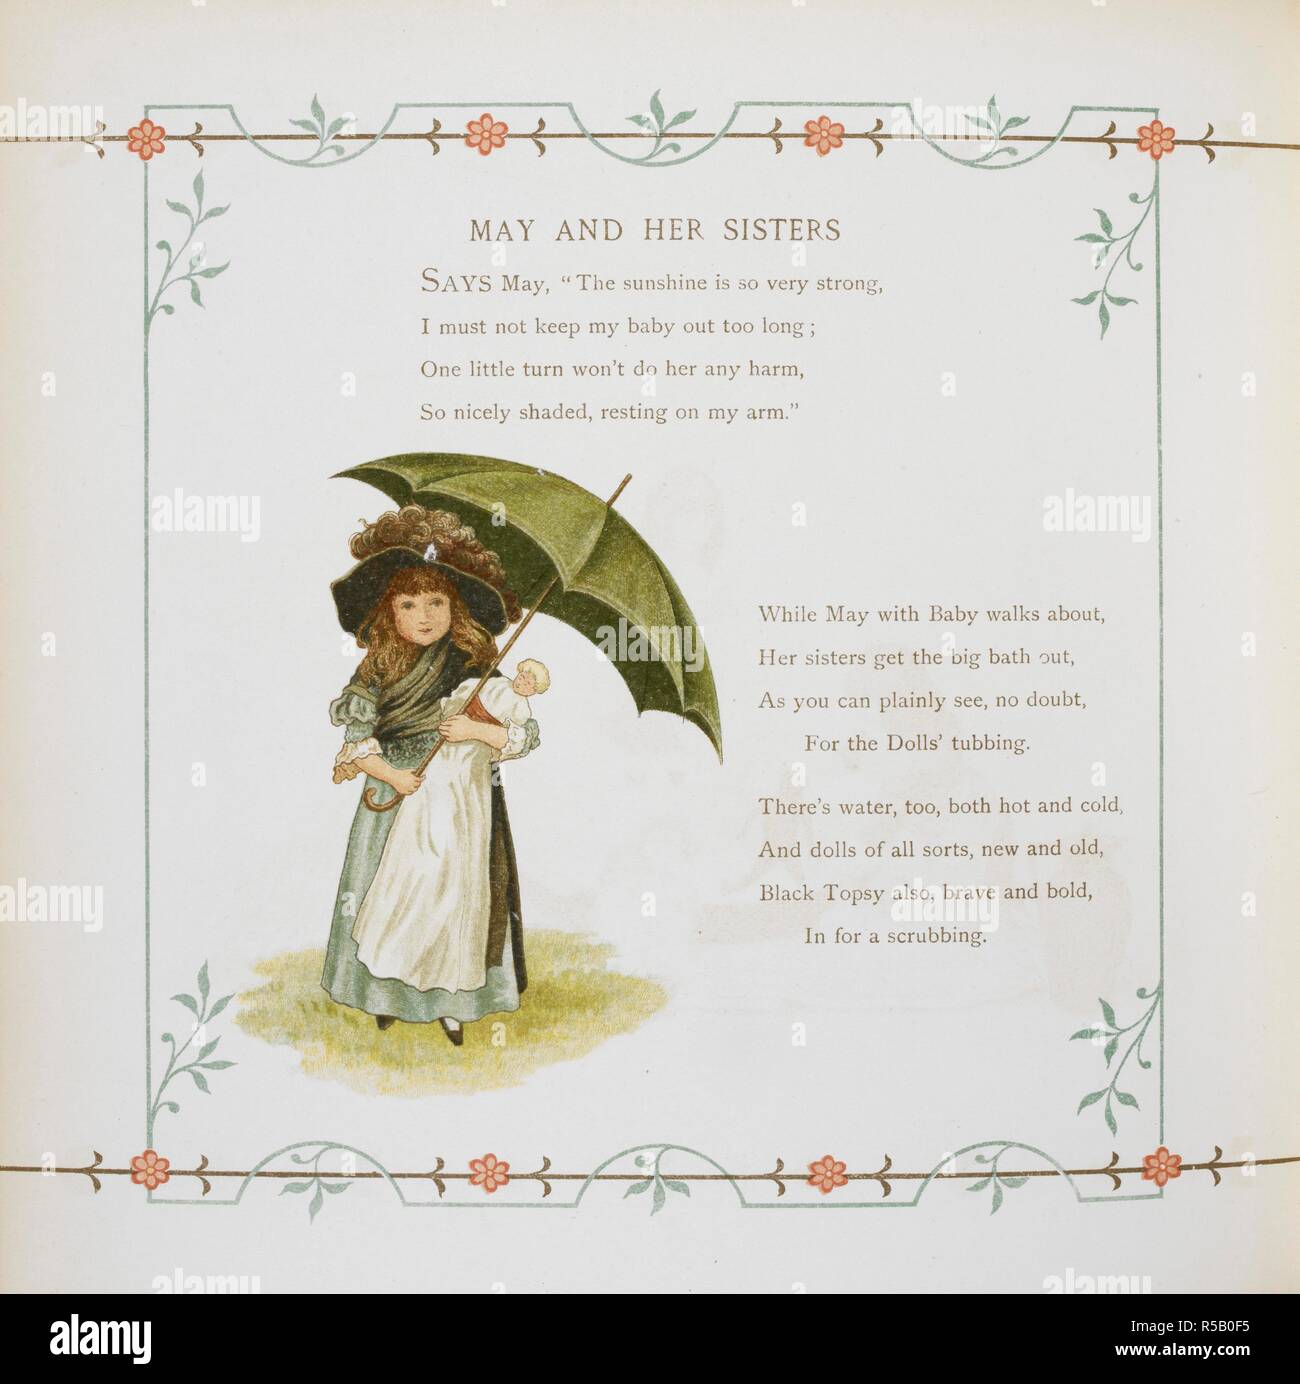 Young girl holding an umbrella. At Home again Verses [Illustrated by] J G Sowerby and T Crane. London : Marcus Ward & Co., [1886]. Source: 12806.t.30 page 44. Author: Sowerby, John G. Sowerby, John: Crane, T. Stock Photo